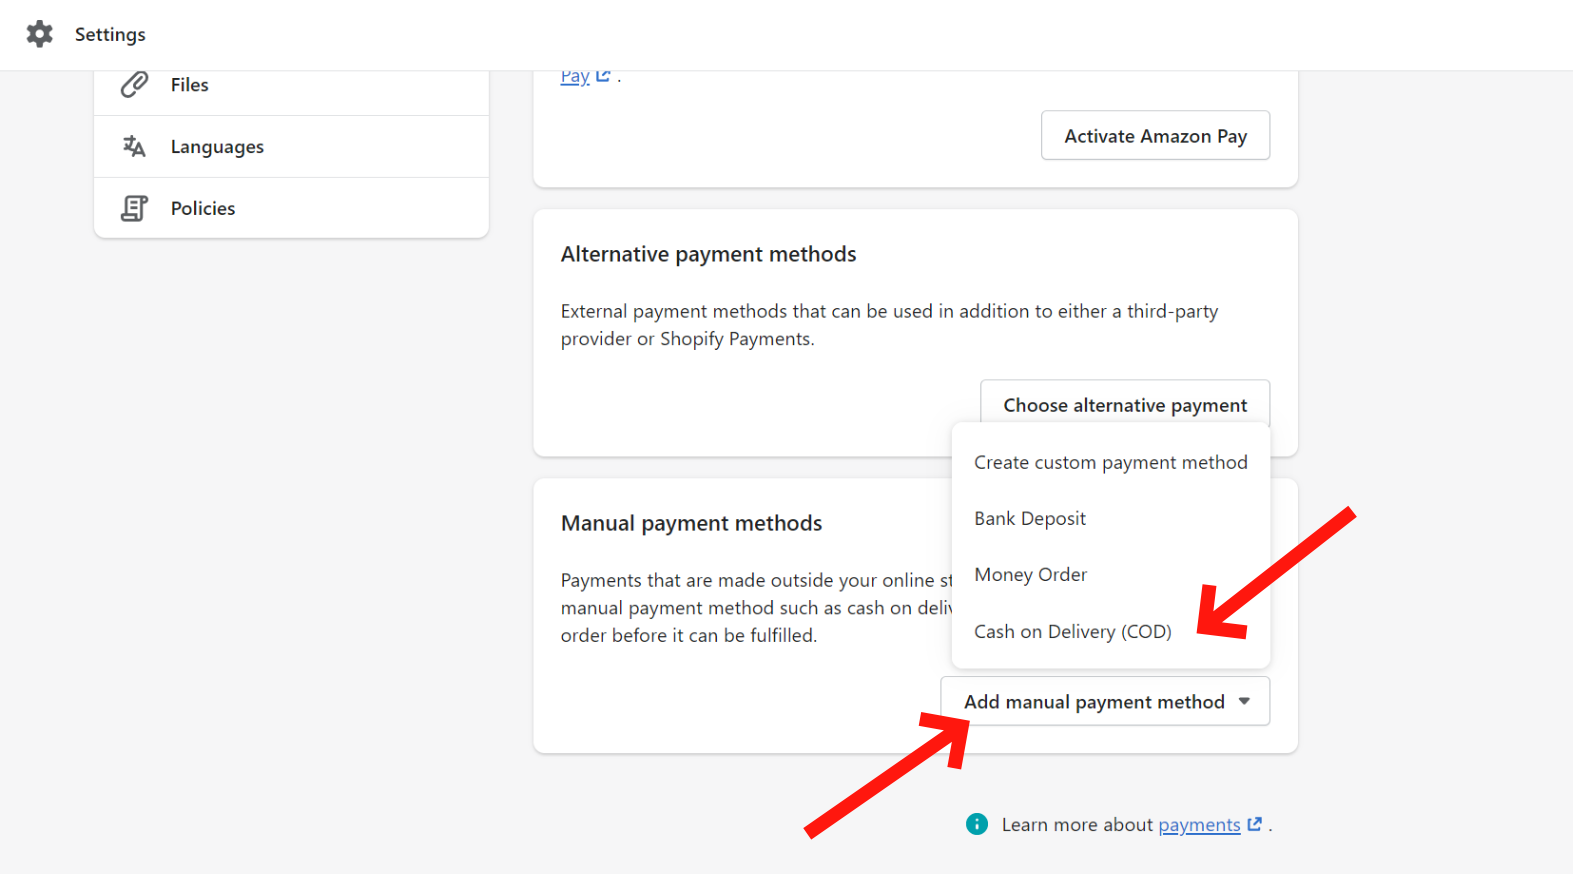 Click on the manual payment methods button